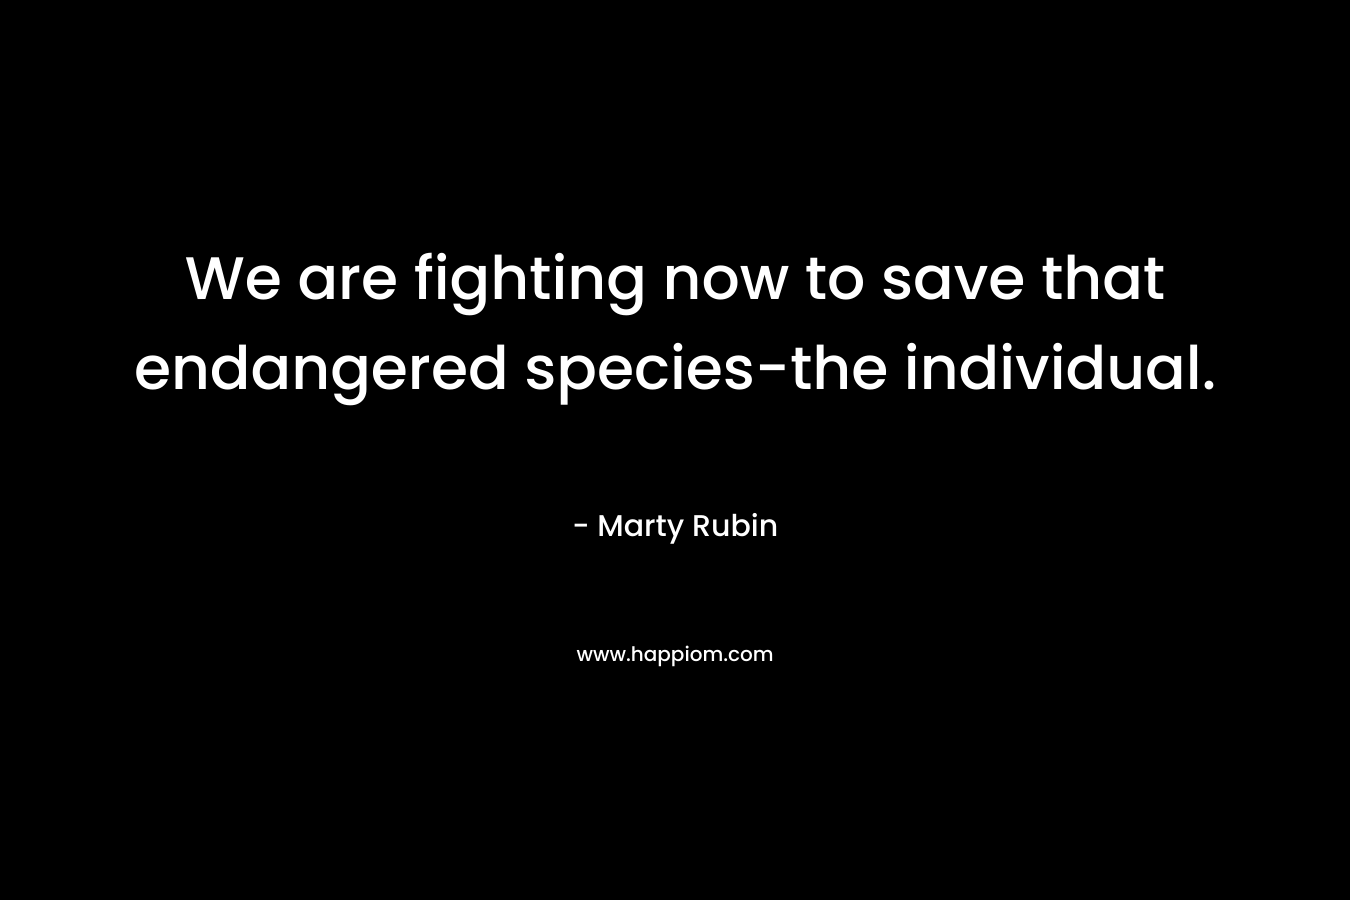 We are fighting now to save that endangered species-the individual. – Marty Rubin